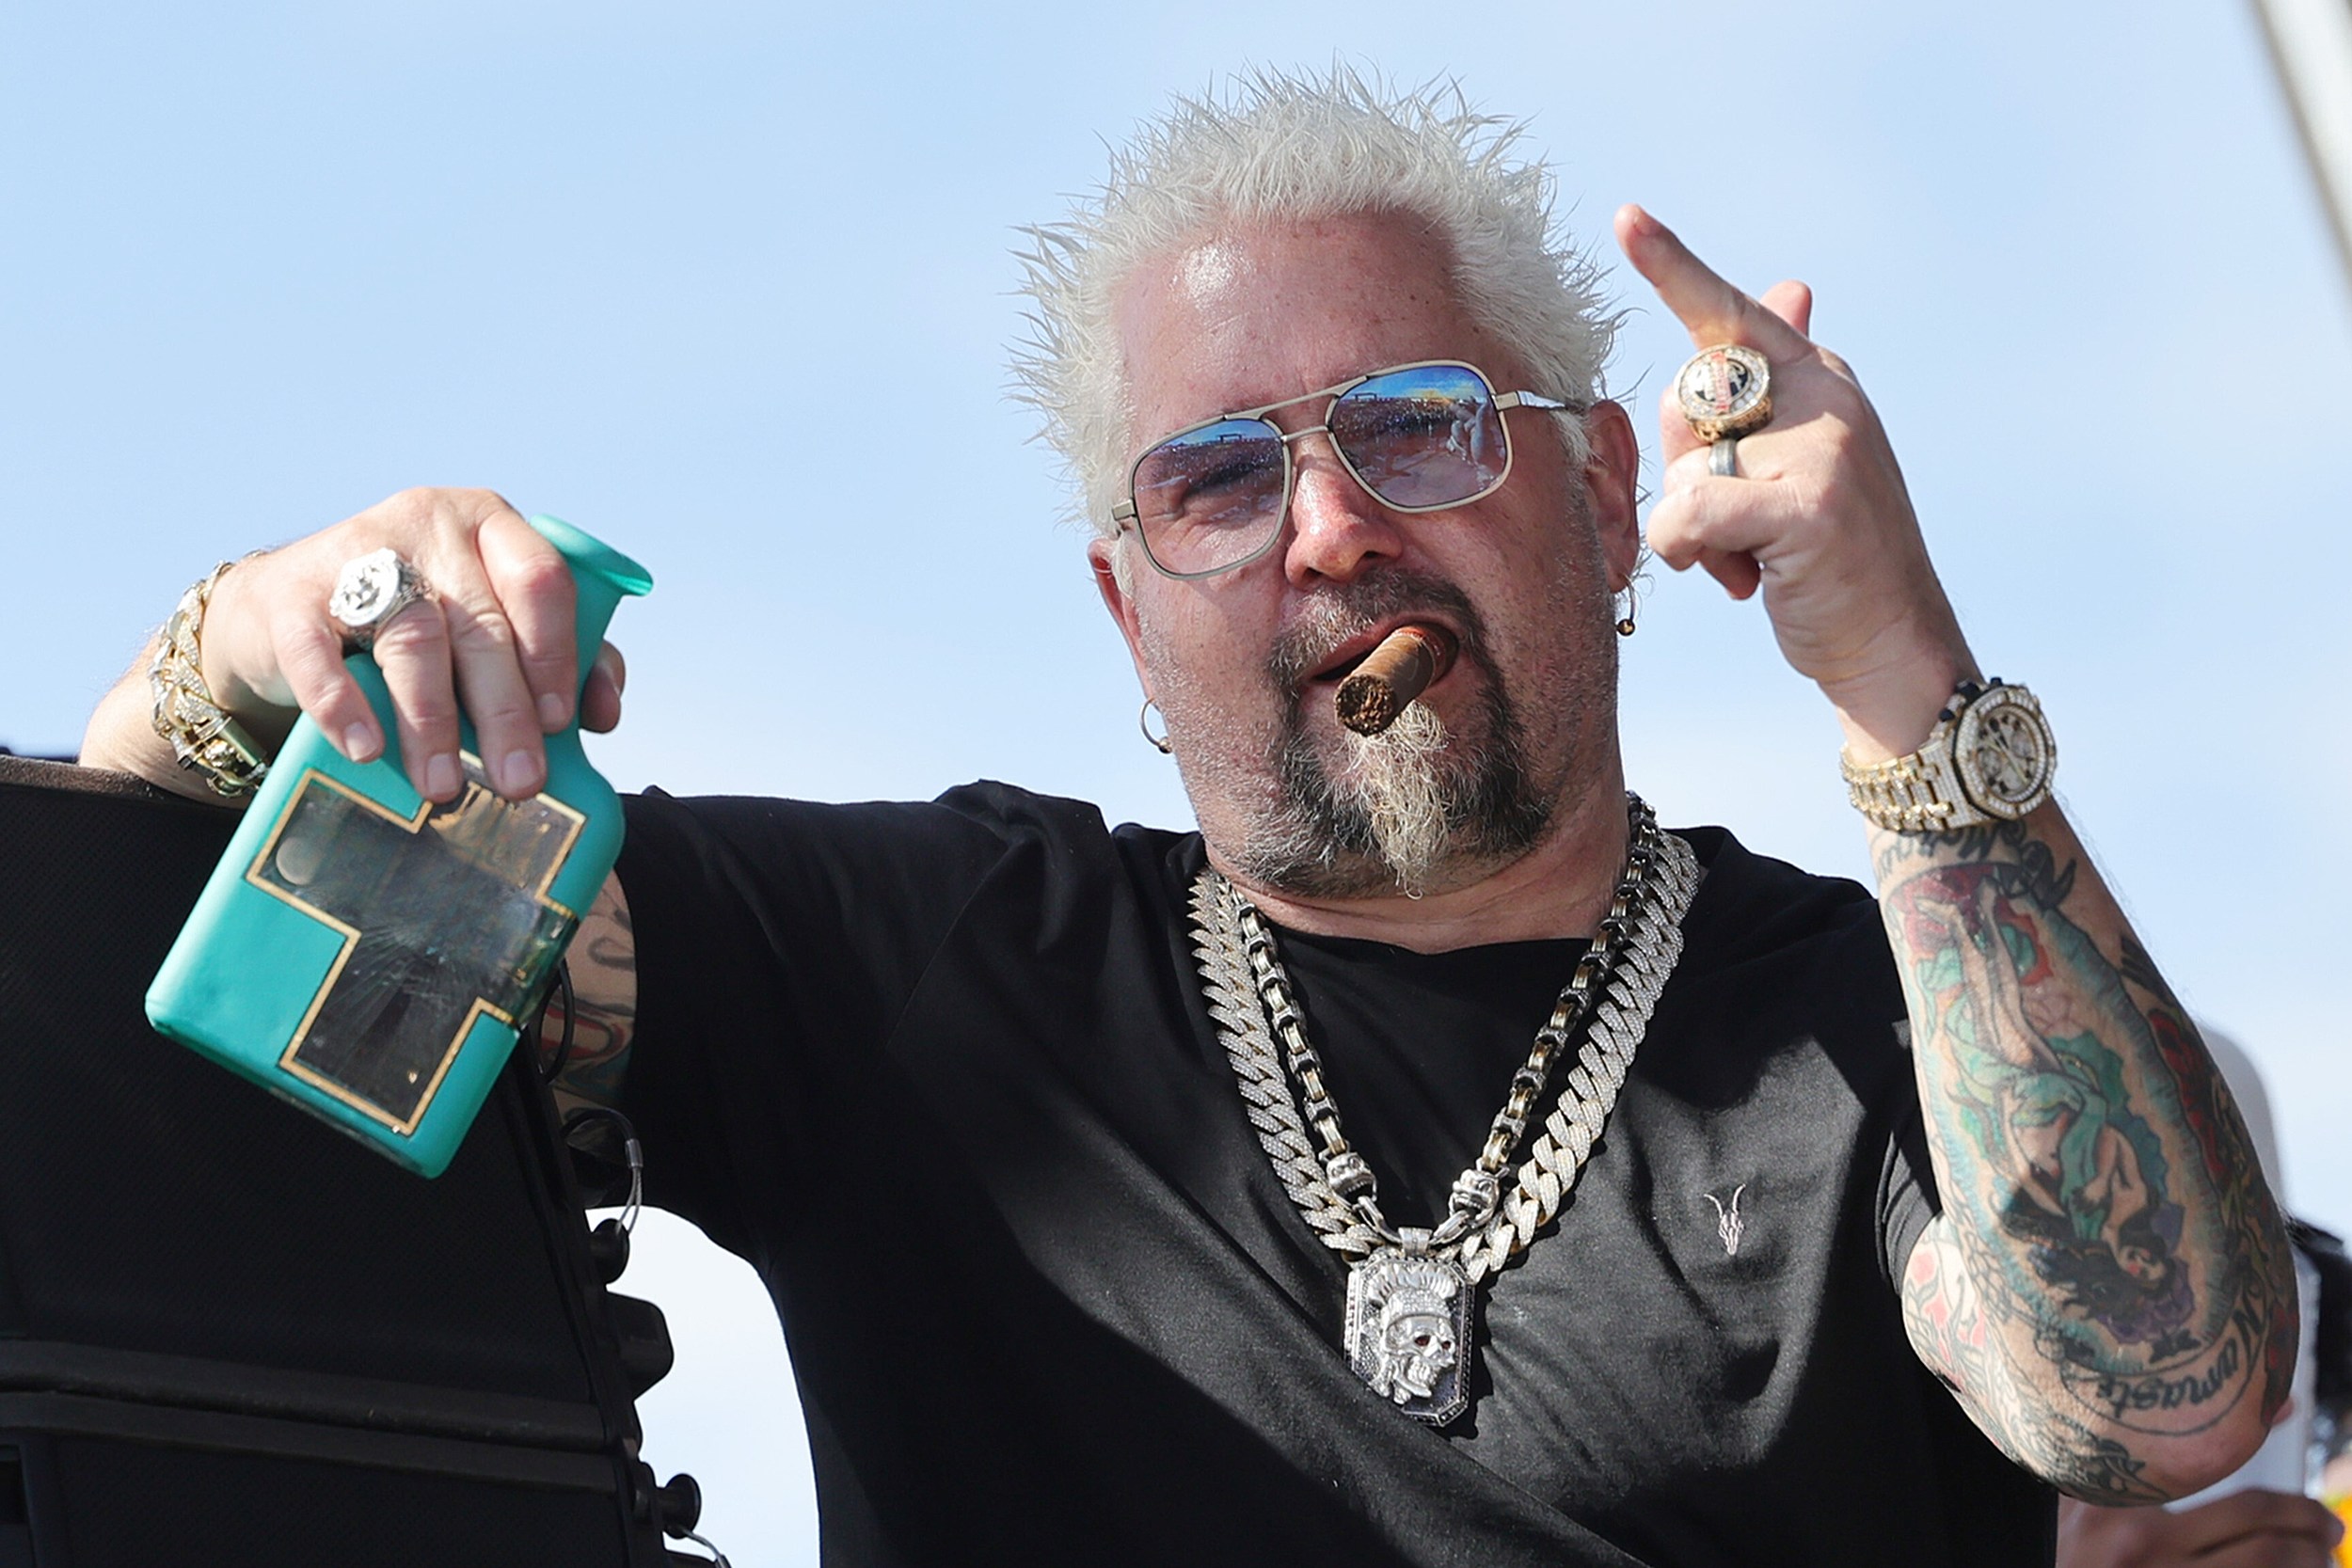 Oregon Restaurant Named One of the Best ‘Diners, Drive-ins, and Dives’ in America